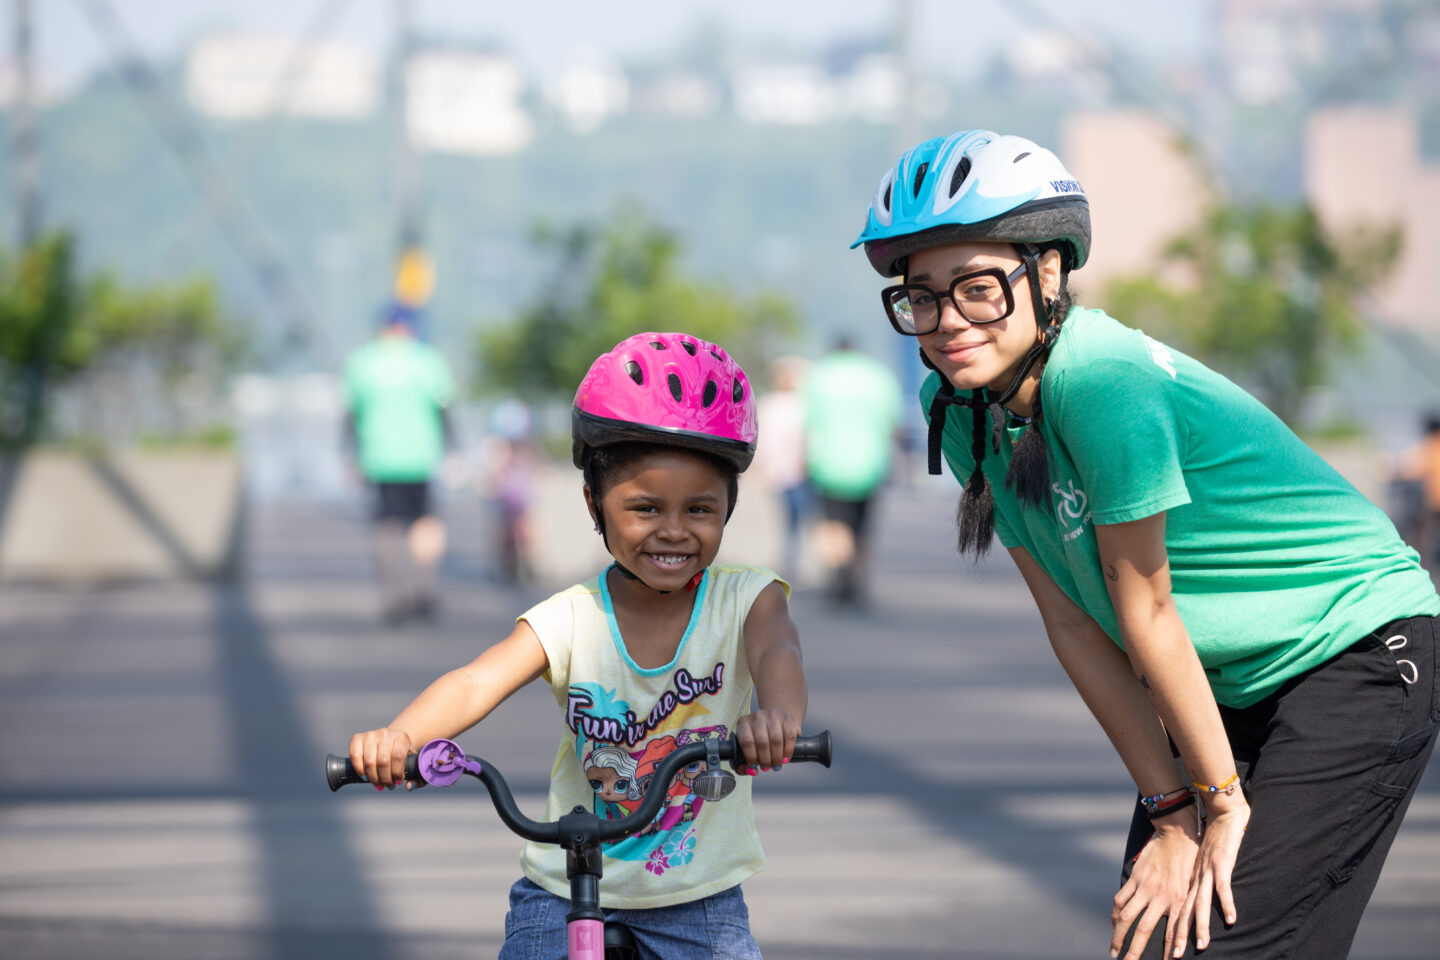 A Bike New York instructor smiling with a student at the Bike Skills 101 class for kids